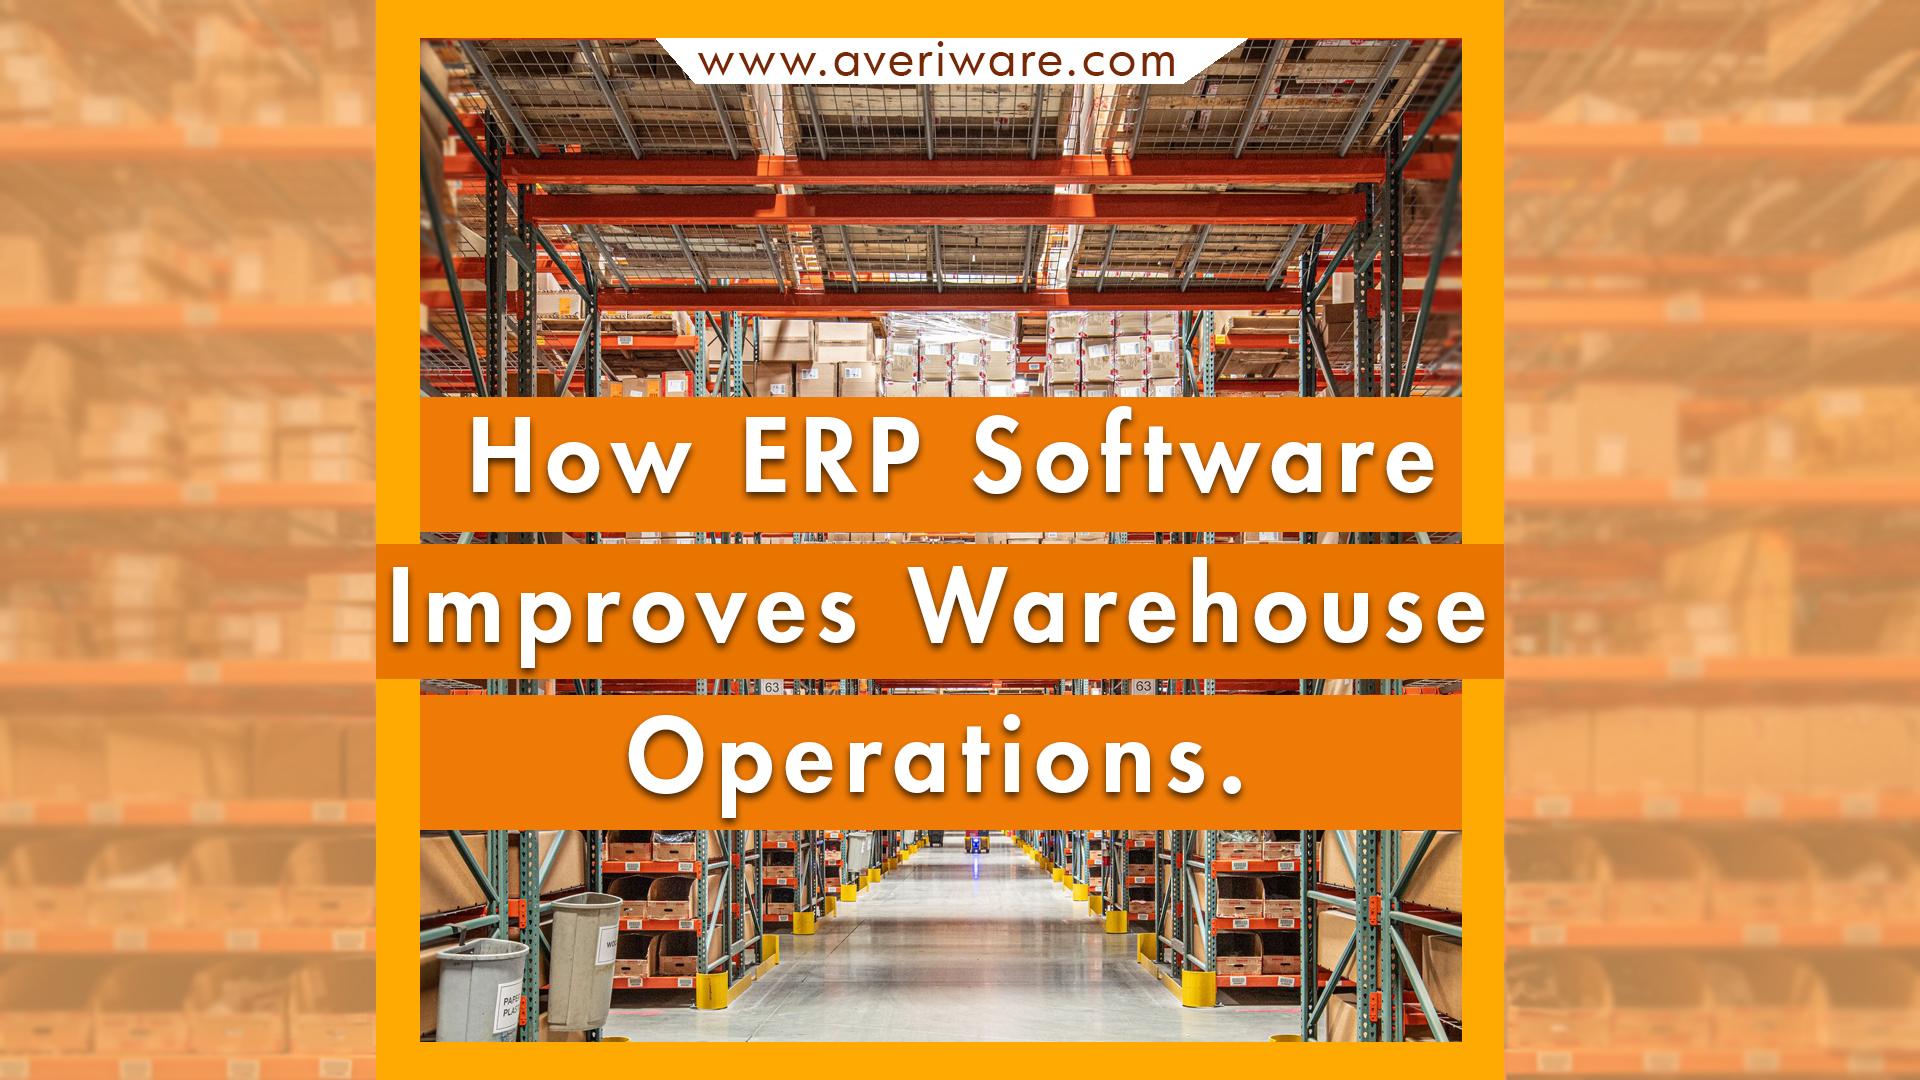 How ERP Software Improves Warehouse Operations